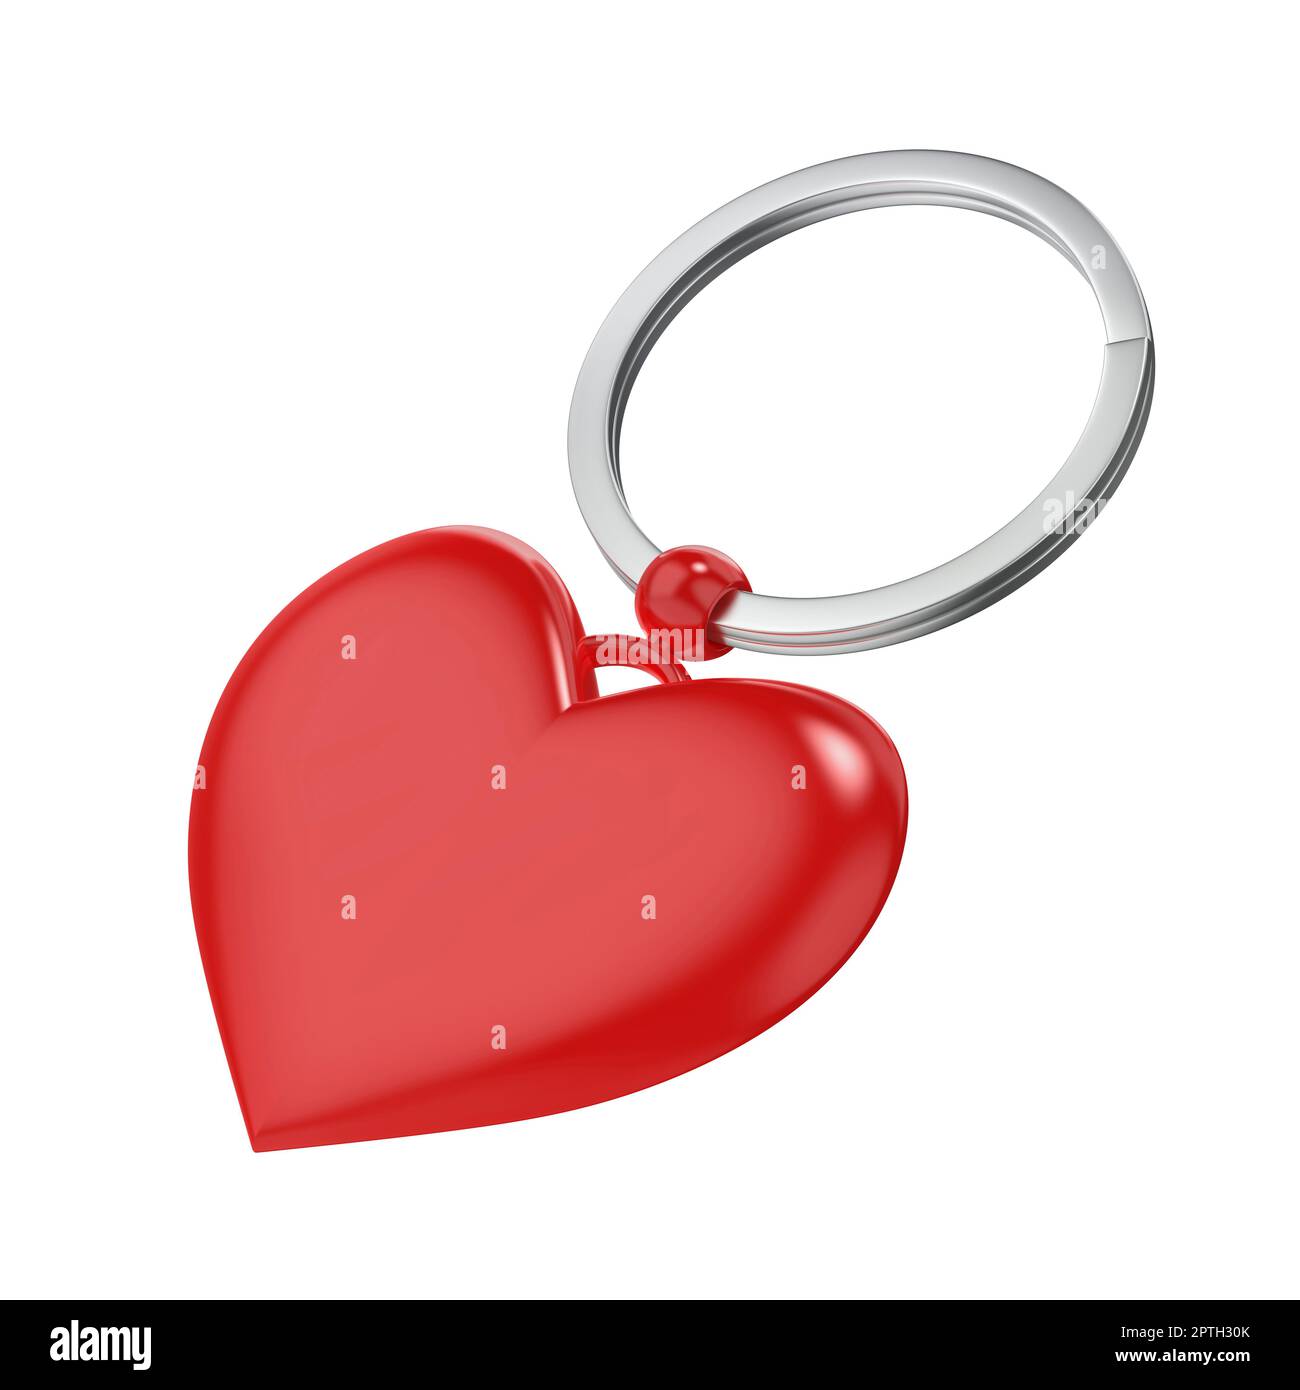 Free Vector  Blank keychains set. silver pendants with round, square,  heart and hexagon shapes